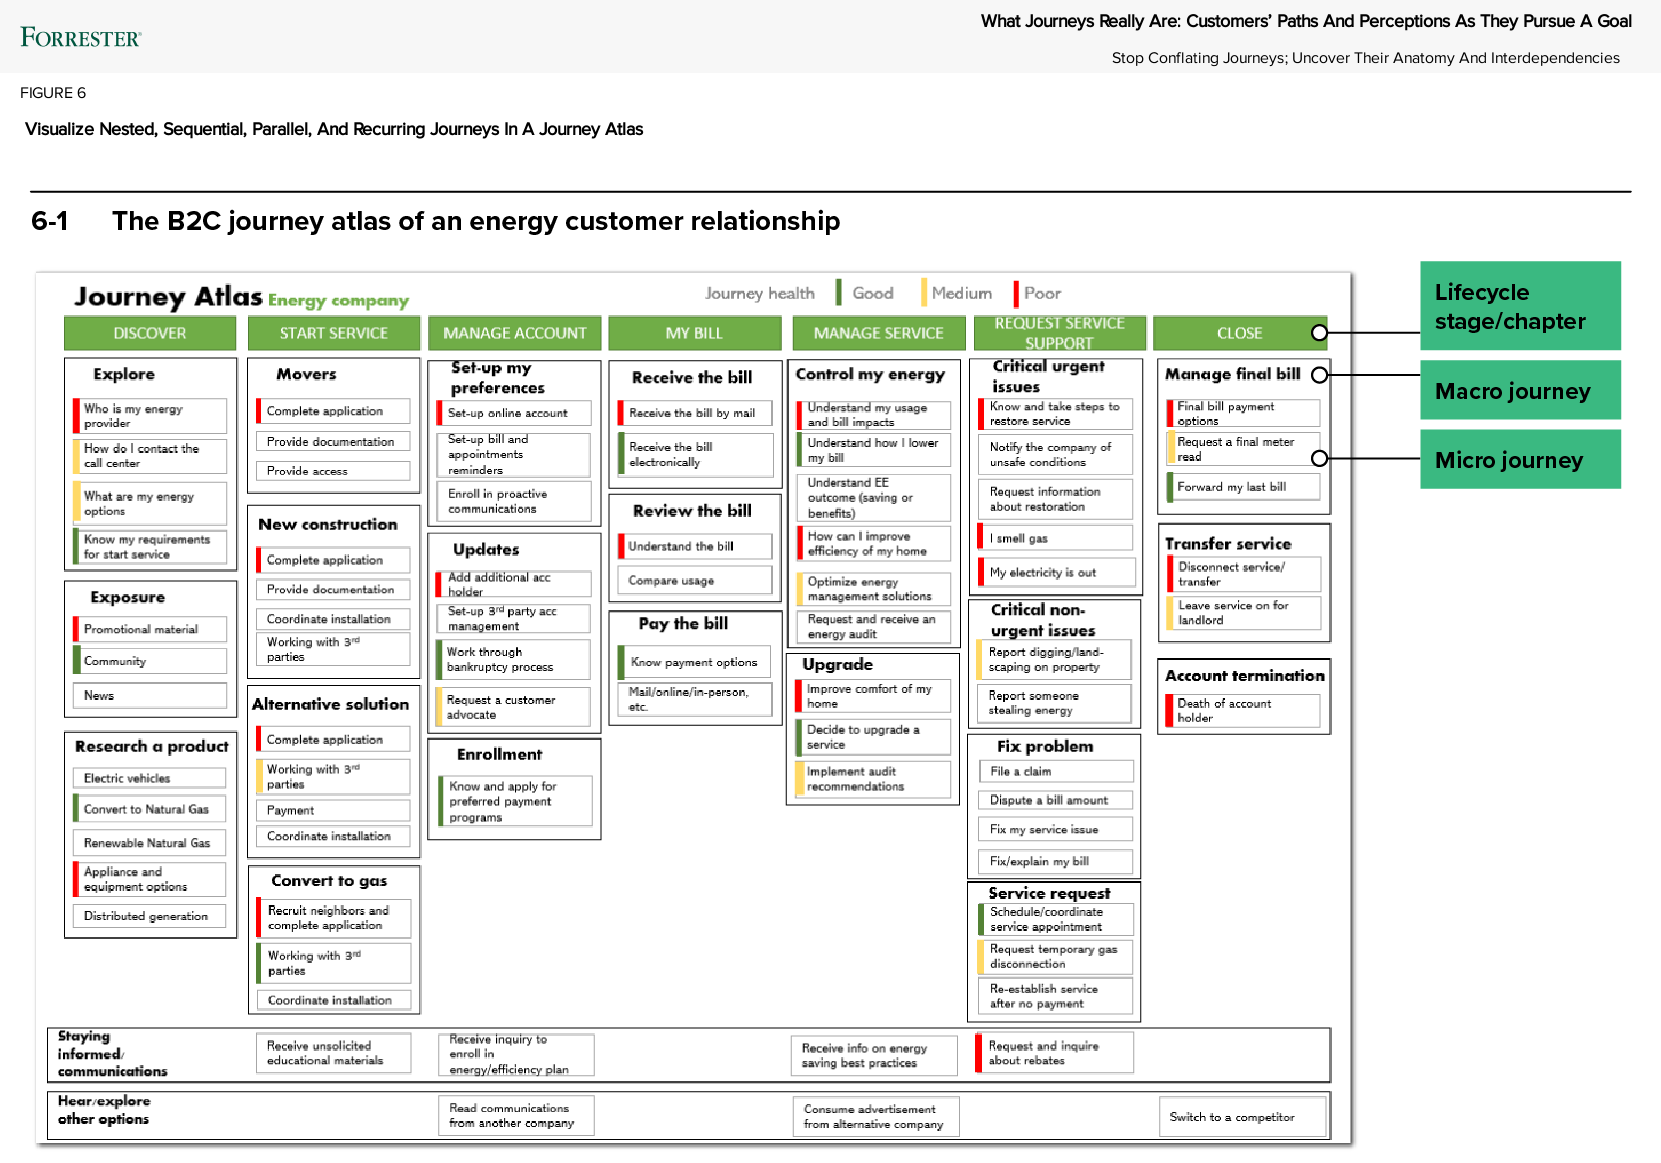 An example of an energy customer journey atlas aligned to a customer lifecycle